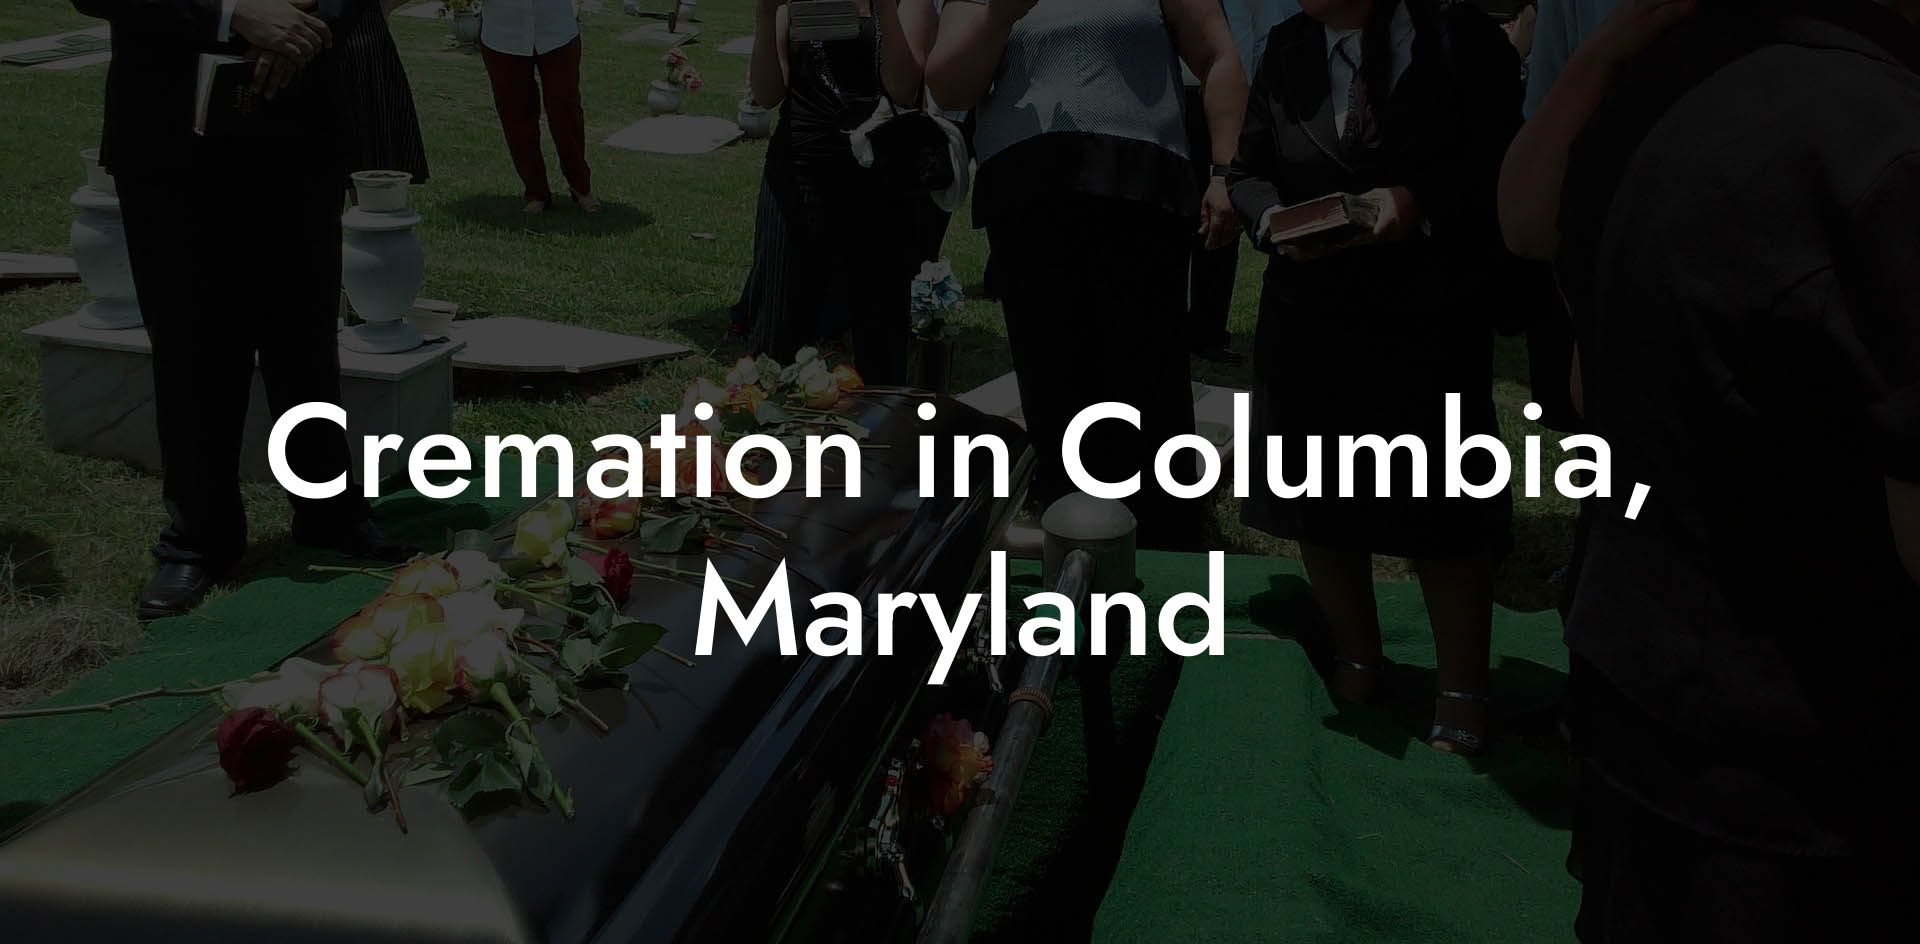 Cremation in Columbia, Maryland